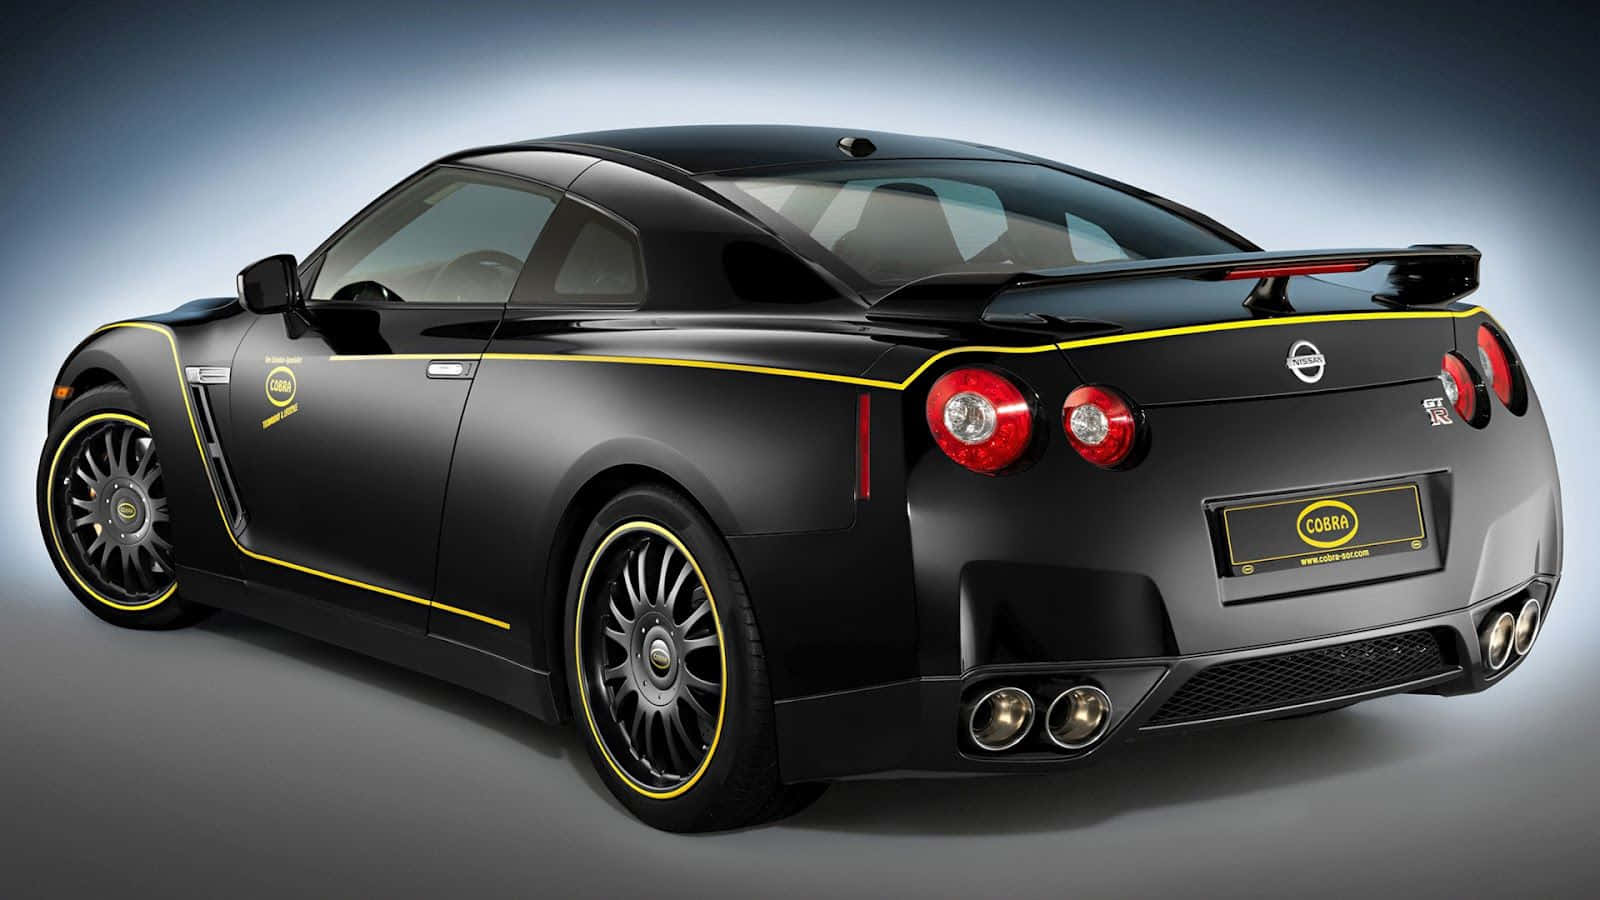 Put The Pedal To The Metal In The Stunning Cool Gtr Background